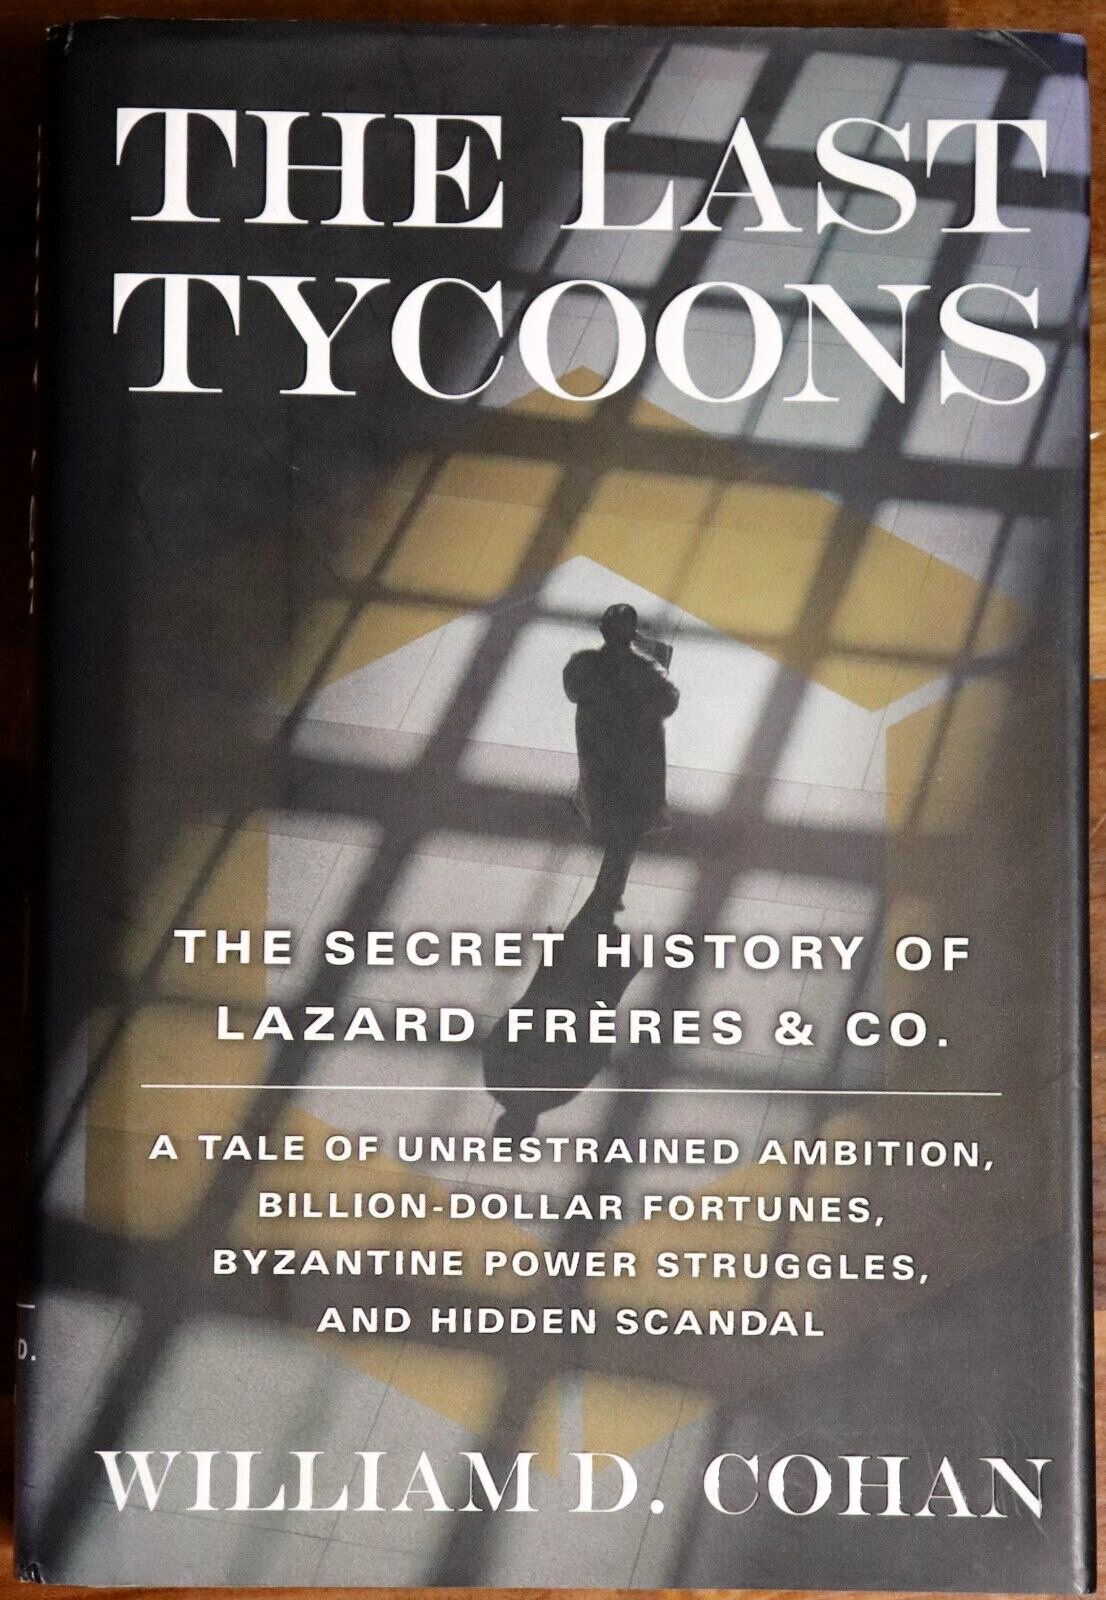 The Last Tycoons by William D. Cohan - 2007 - First Edition Financial Book